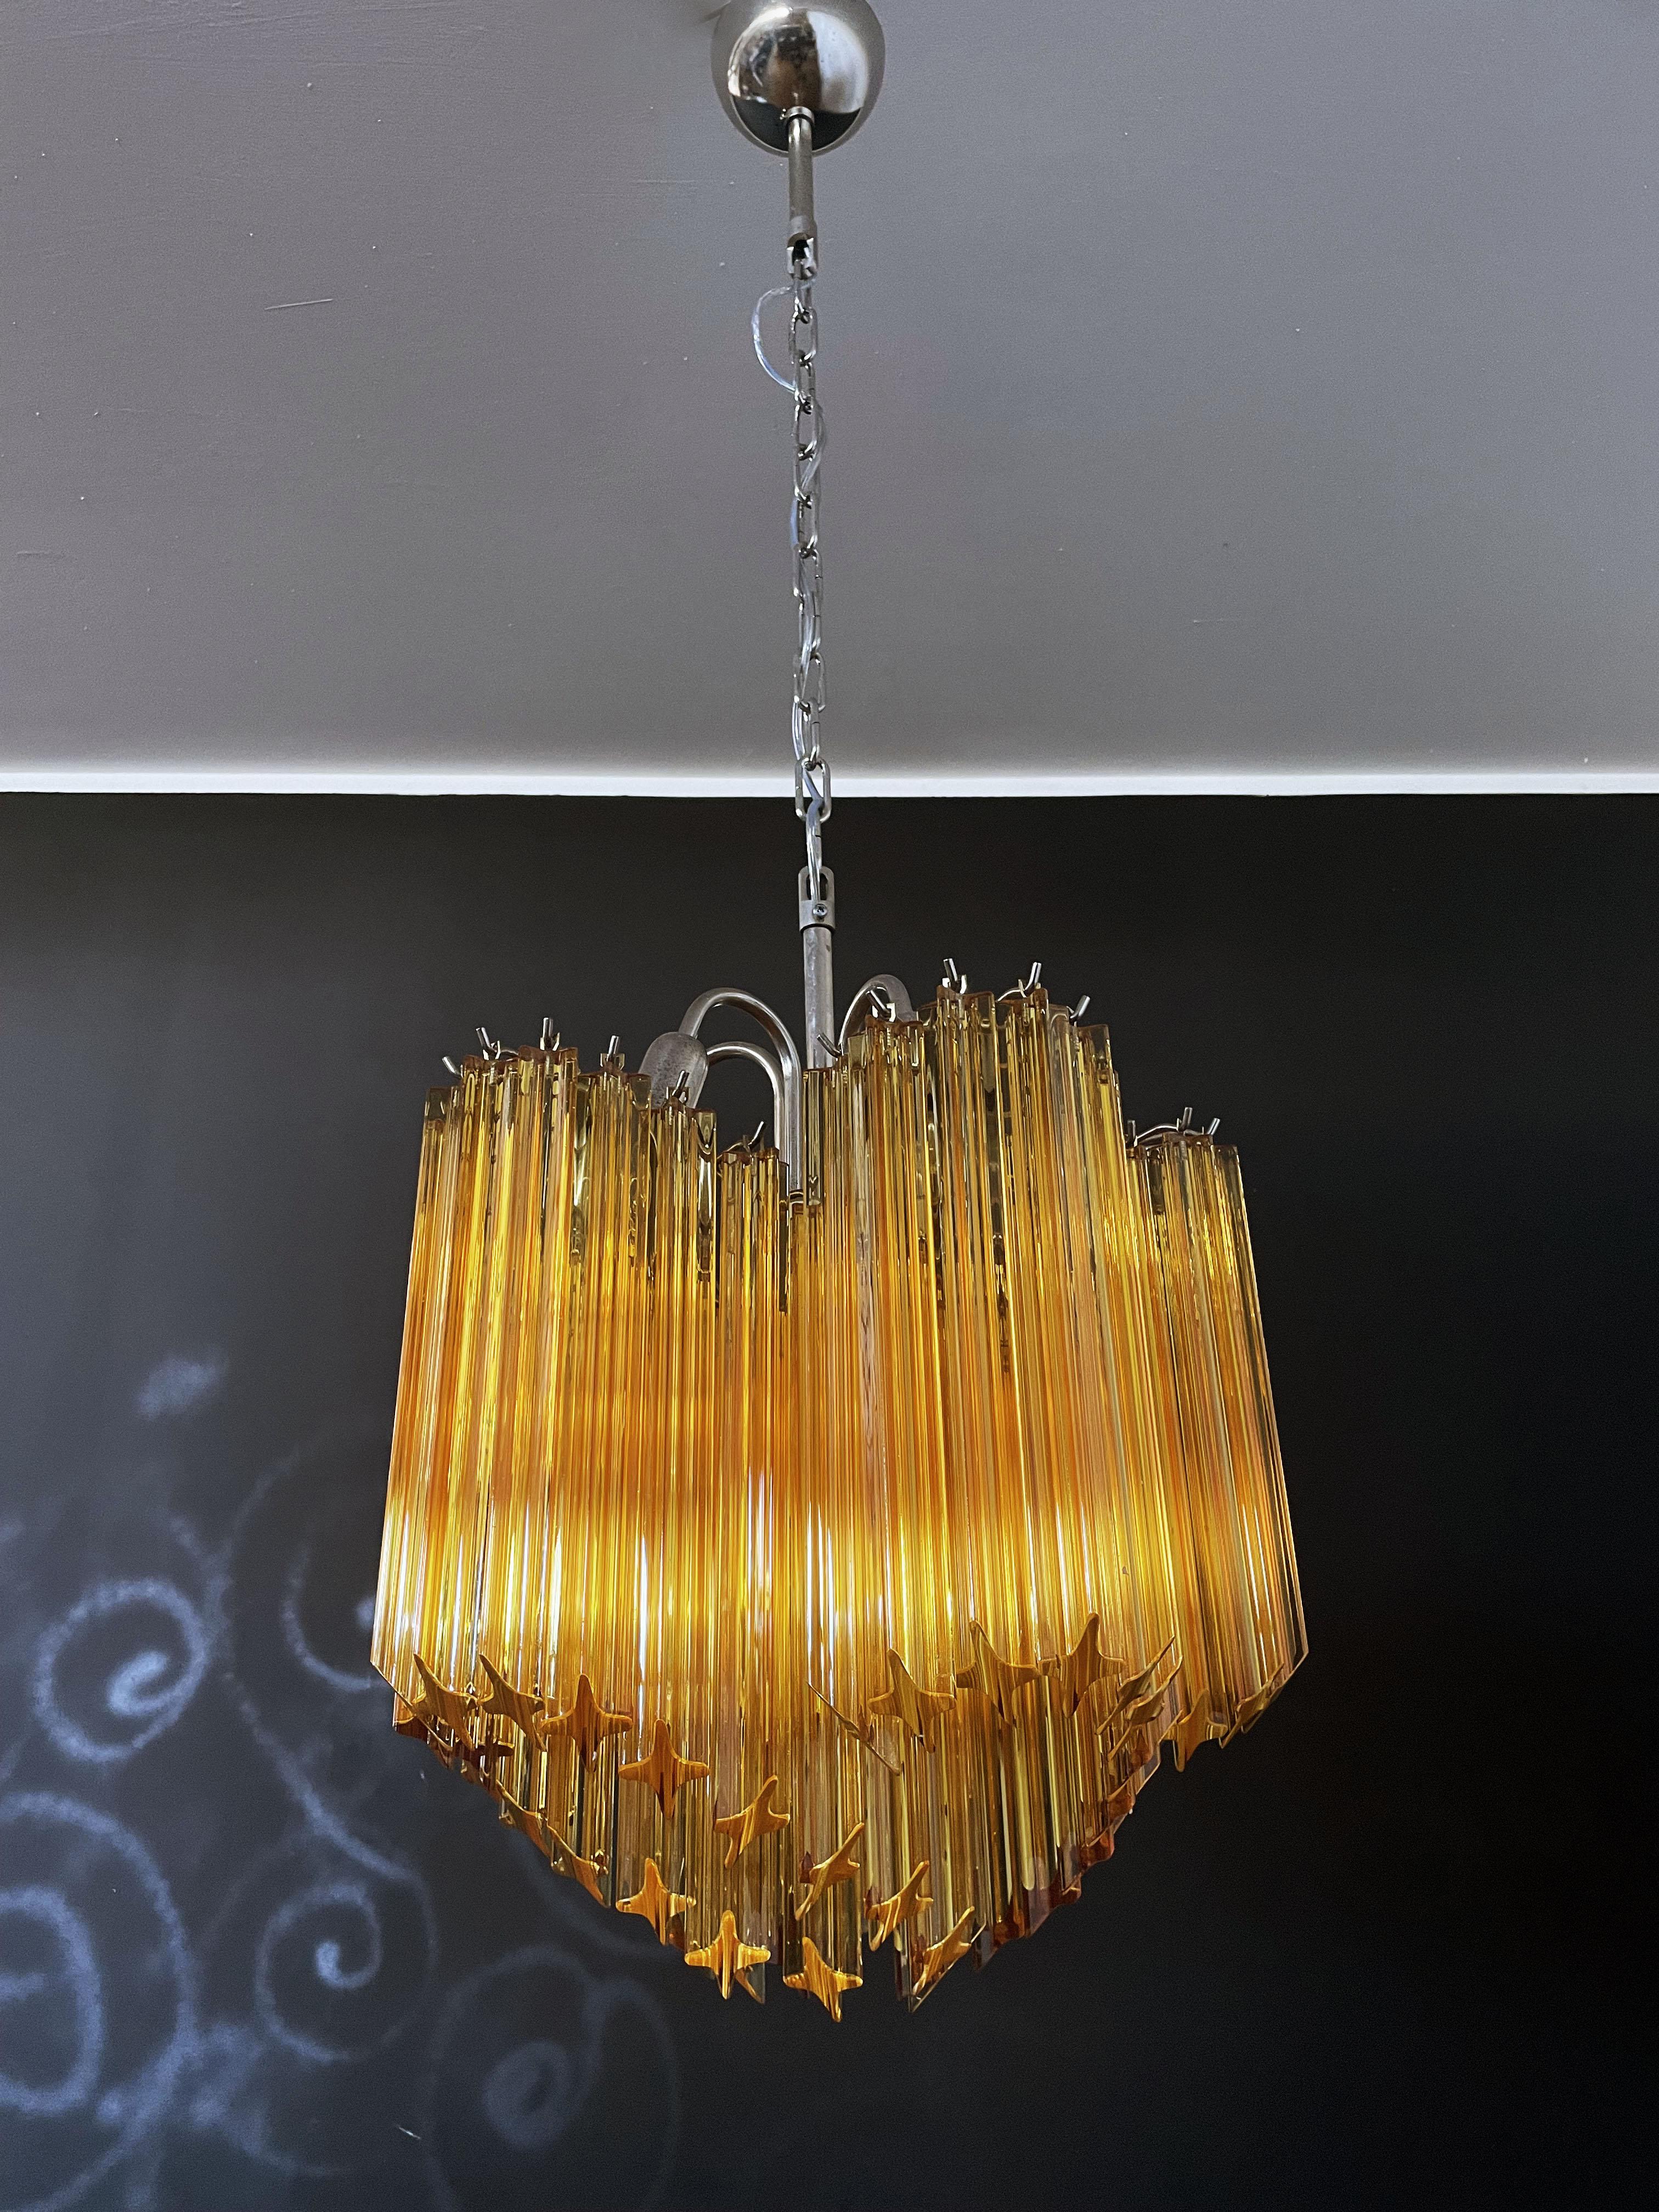 A magnificent Murano glass unique chandelier, spiral shape, very elegant, 60 amber quadriedri on nickel metal frame. This midcentury Italian chandelier is truly a timeless Classic.
Period: late 20th century
Dimensions: 46,50 inches (120 cm) height